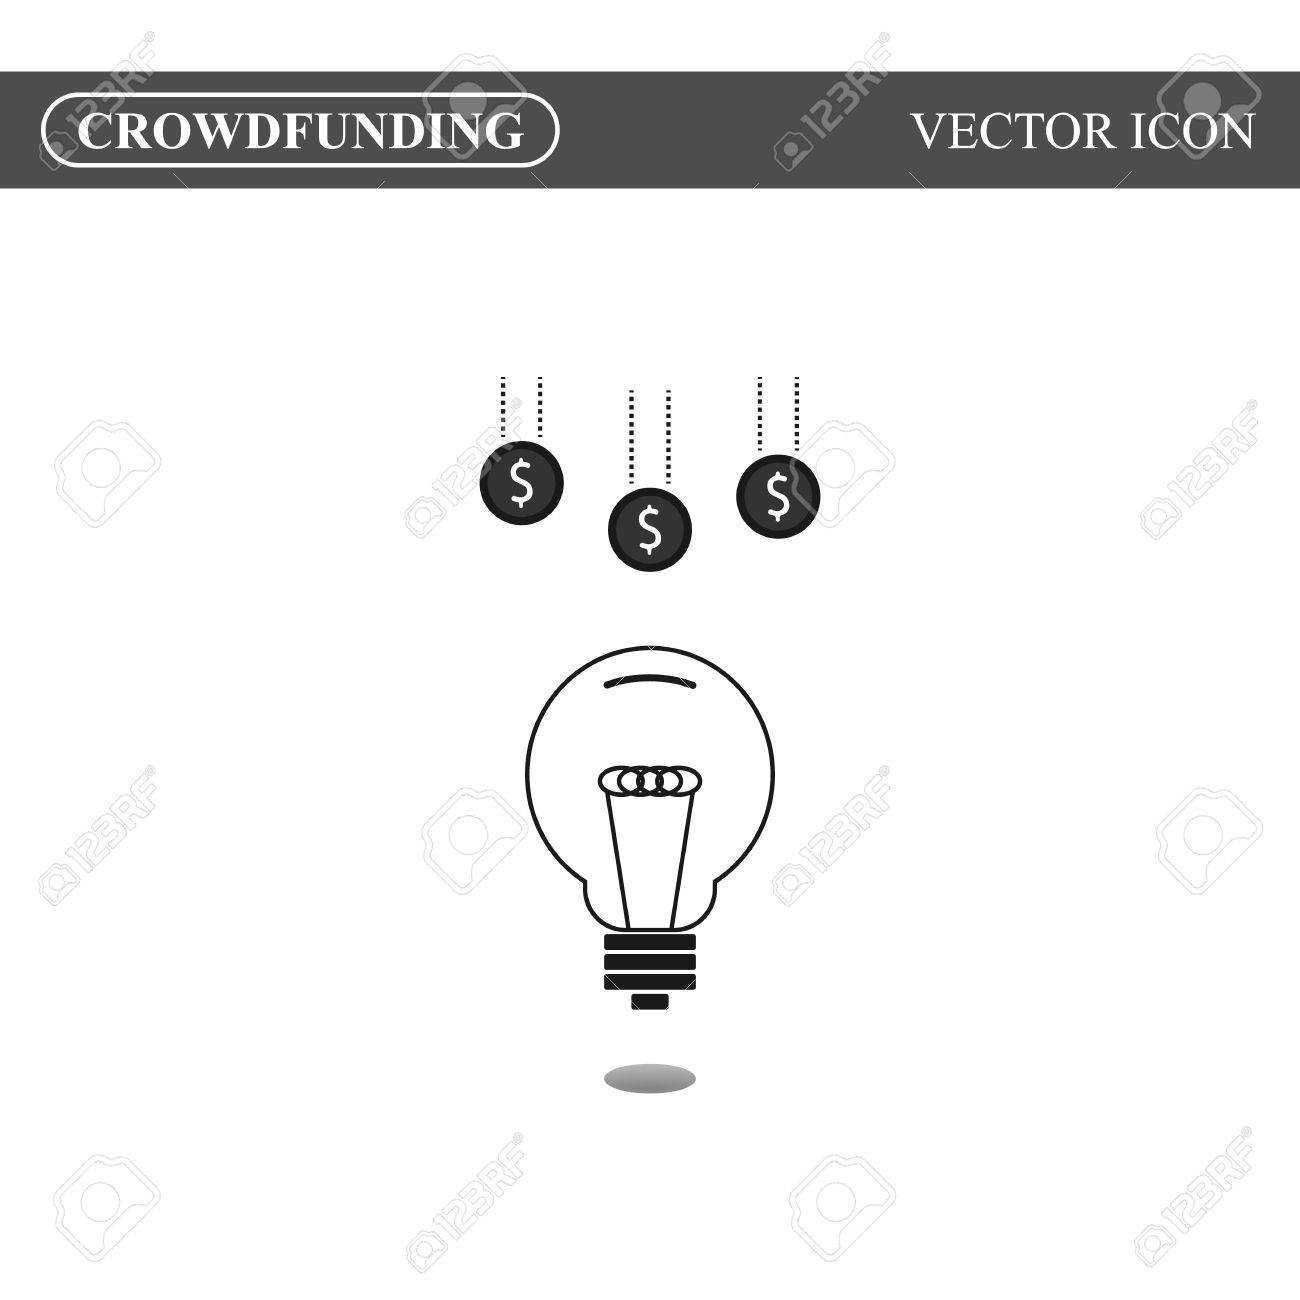 Crowdfunding Icon Flat Style Crowdsourcing Funding Stock Vector 